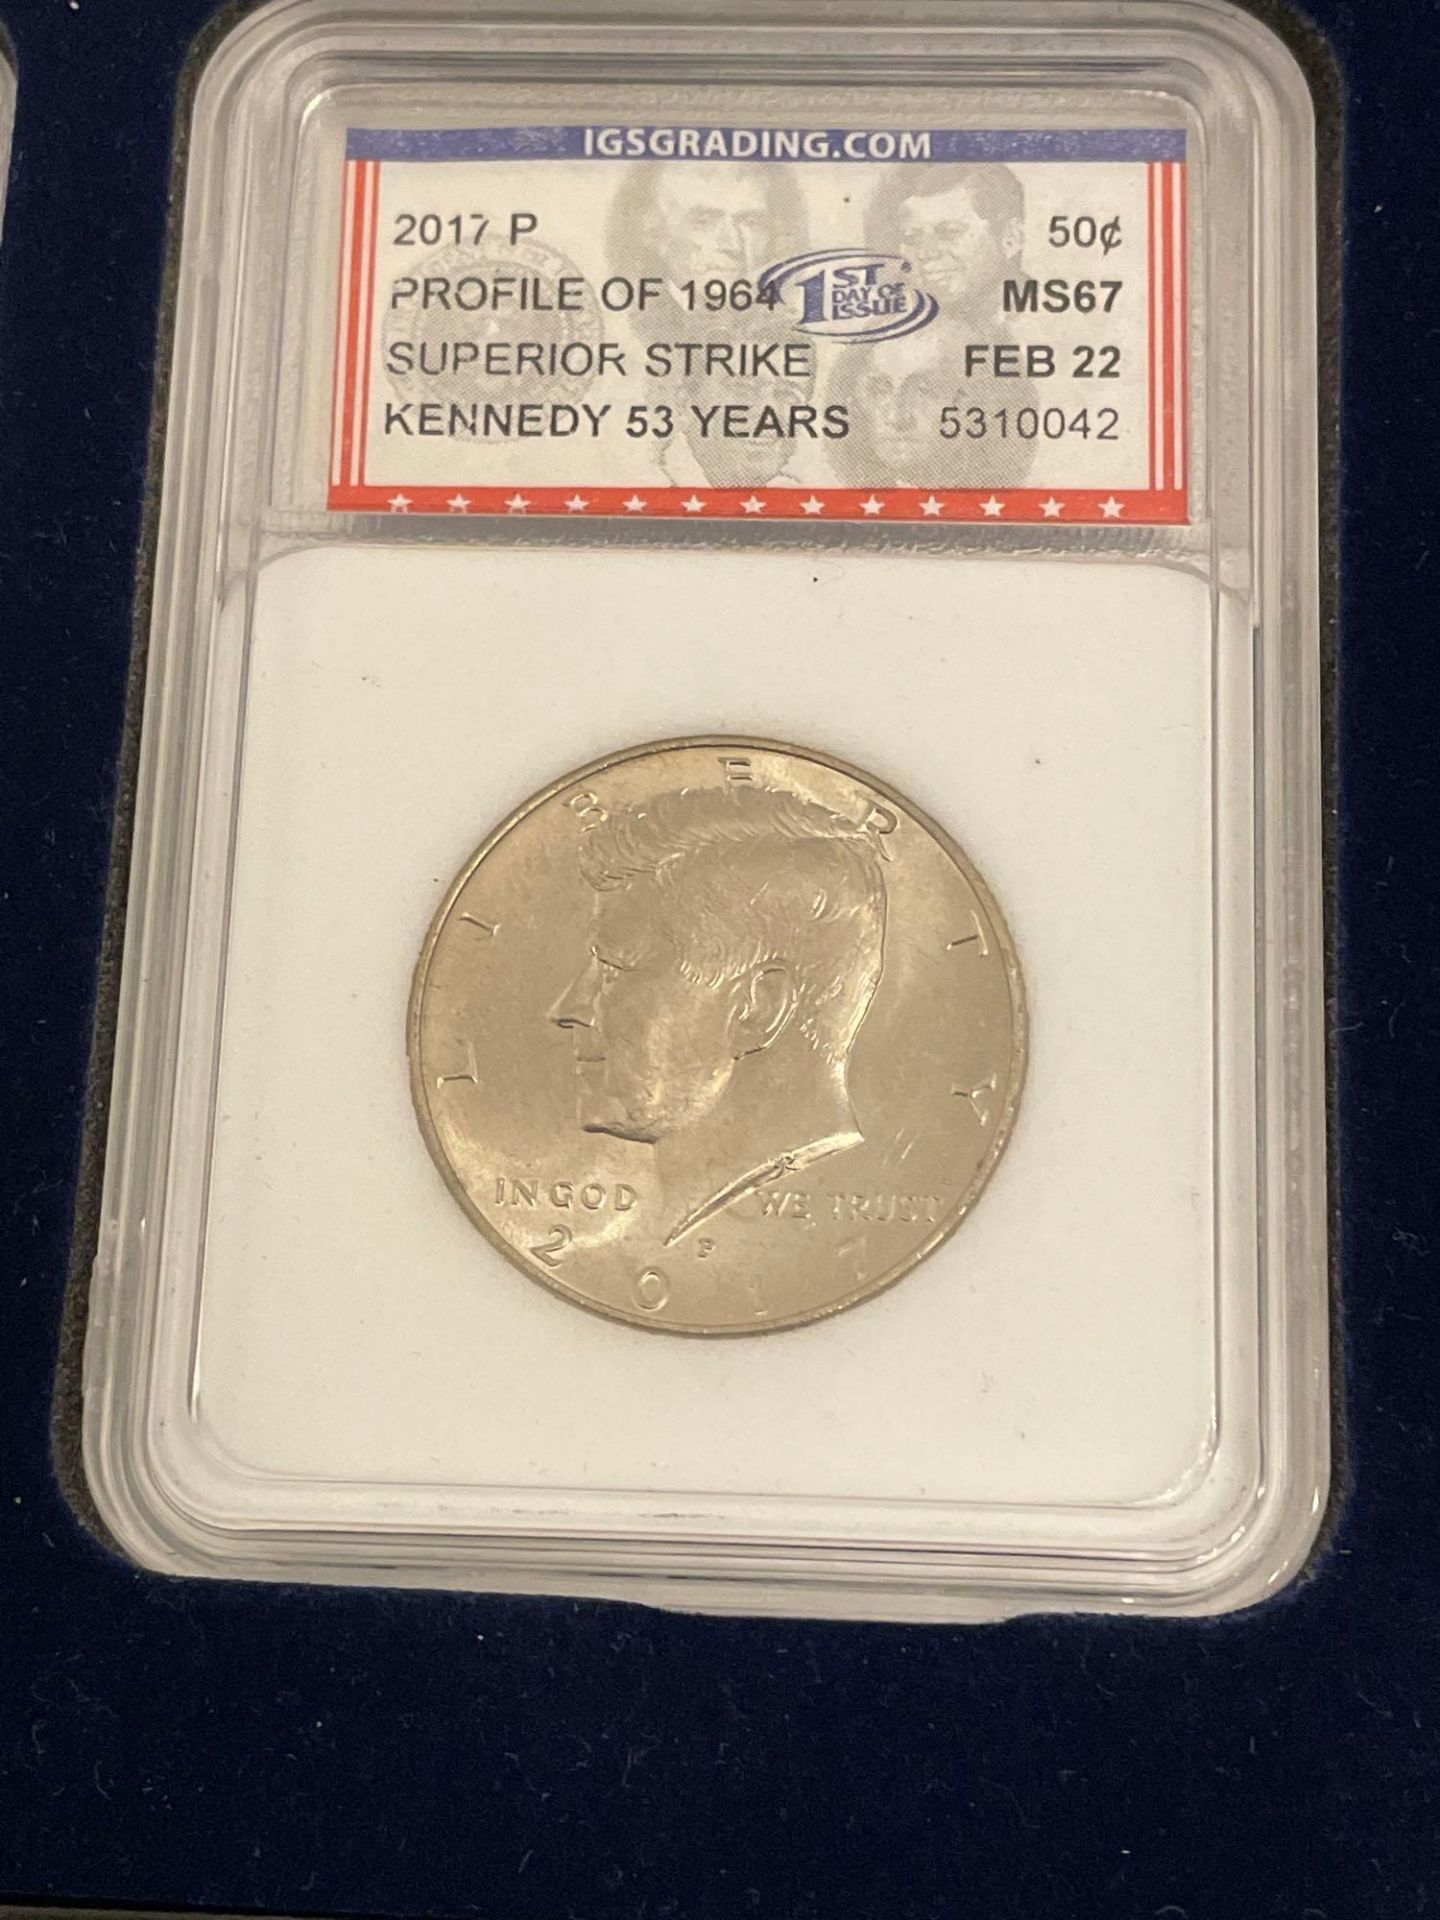 Two 2017 Profile of 1964 Superior Strike Kennedy Half Dollars - Image 2 of 4